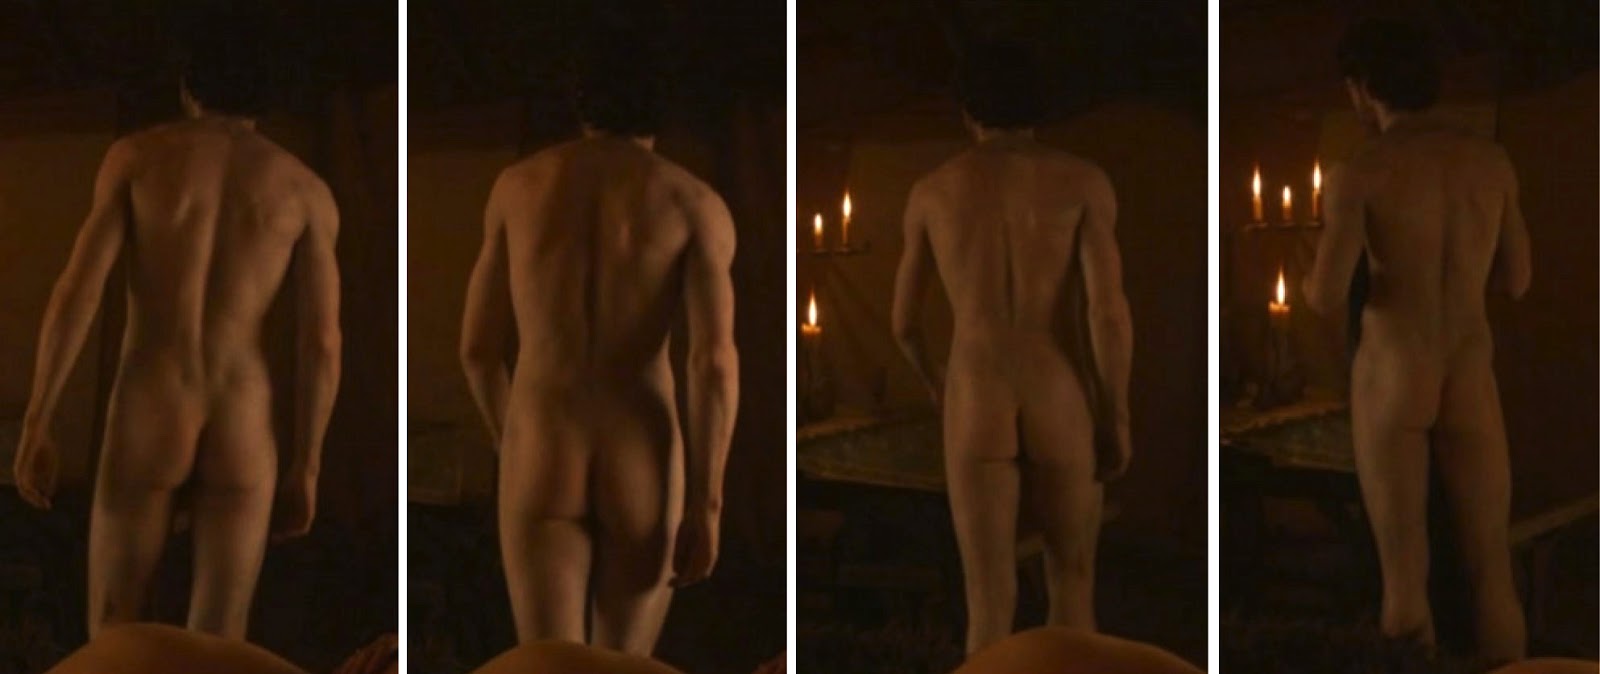 And speaking of beautiful brunette boys from A Game of Thrones getting thei...